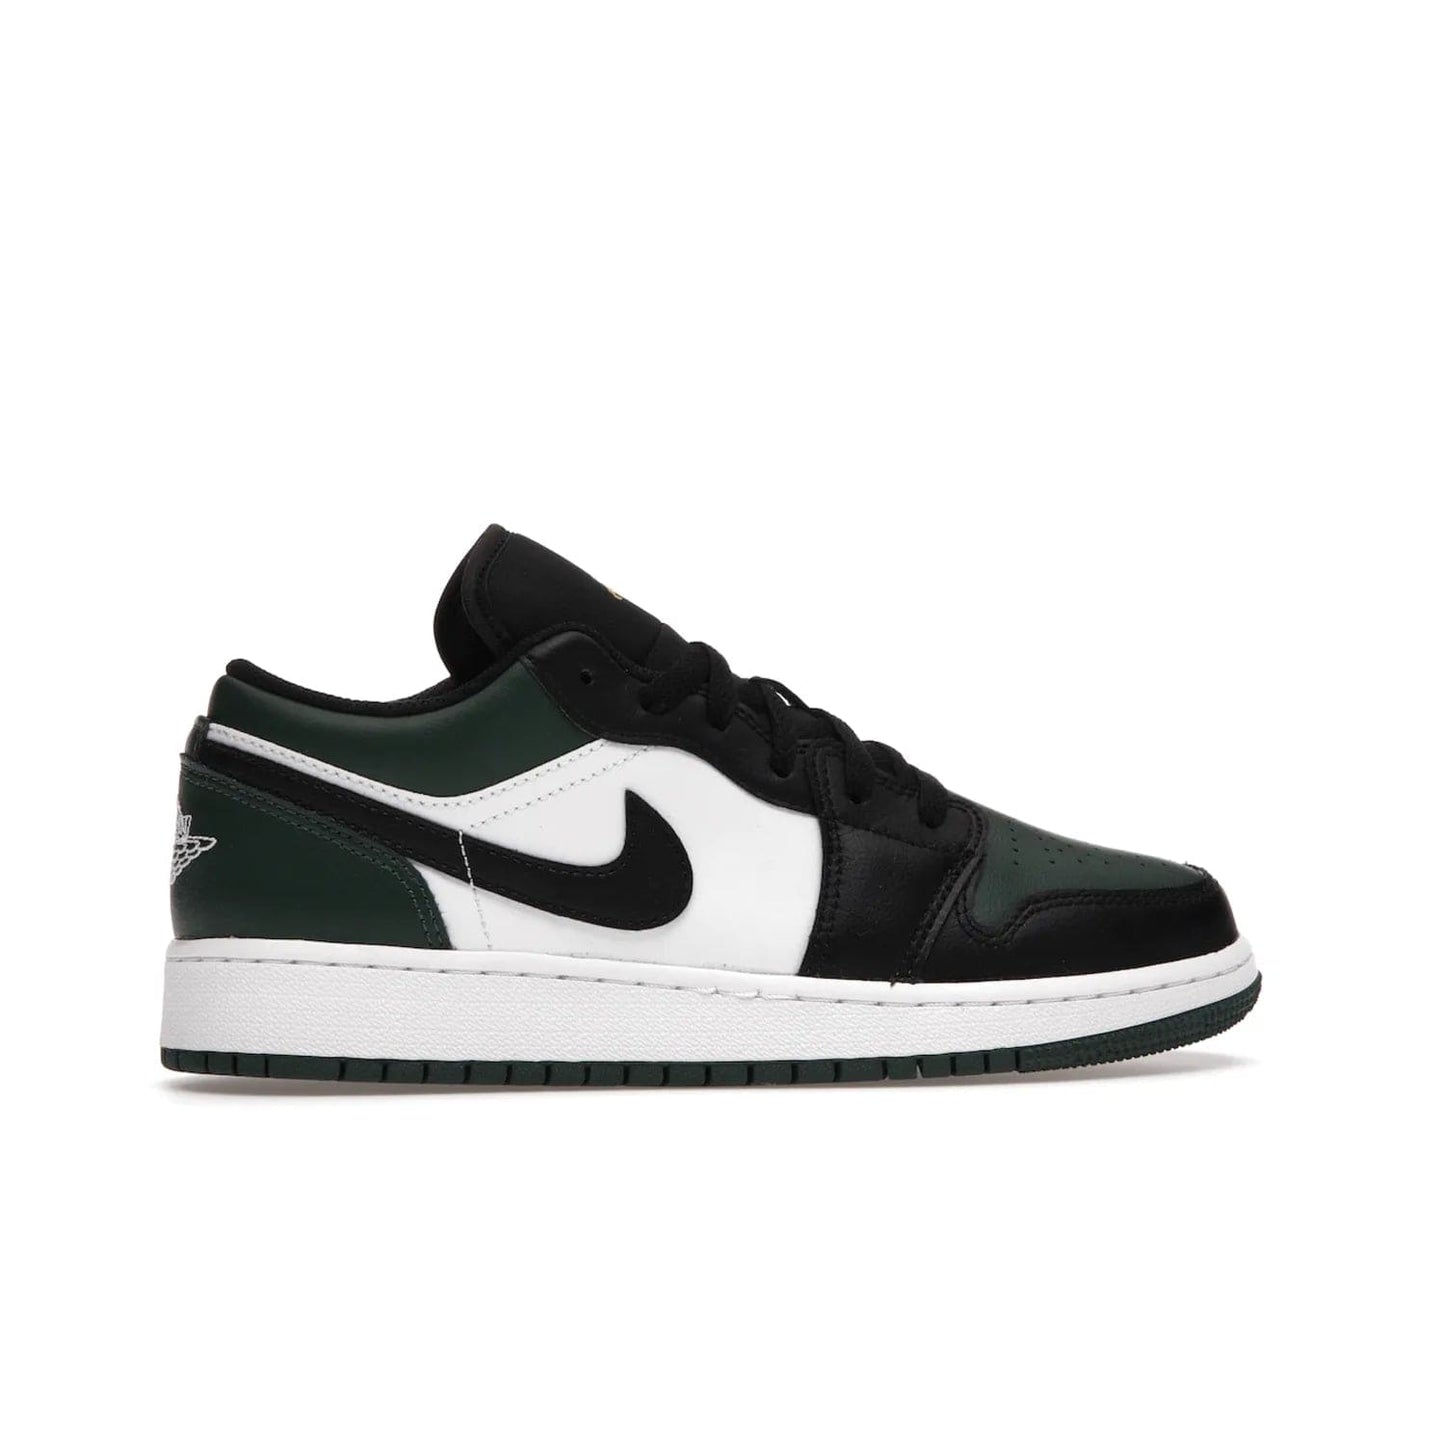 Jordan 1 Low Green Toe (GS) - Image 36 - Only at www.BallersClubKickz.com - Get the perfect low cut Jordans. Shop the Air Jordan 1 Low Noble Green GS shoes with its unique colorway and stencil Jumpman logo. Available October 2021.